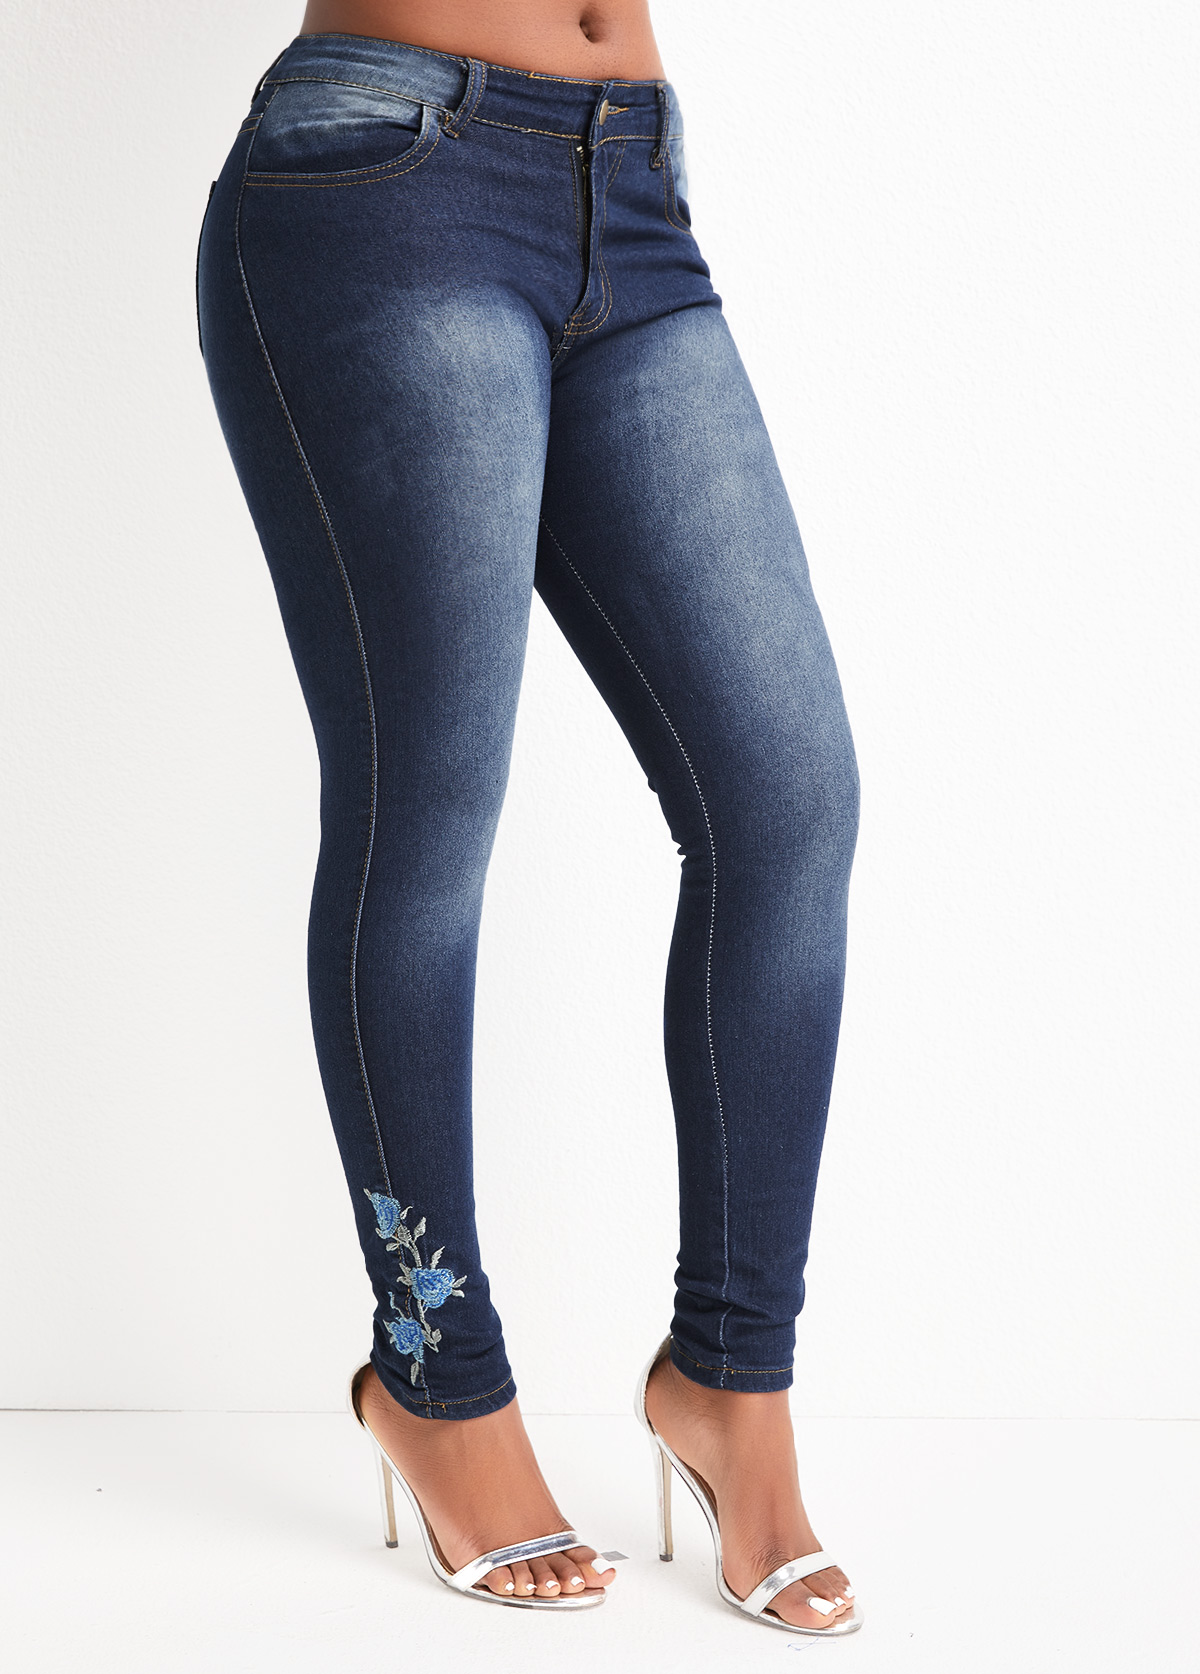 Denim Blue Embroidery Floral Print Skinny Zipper Fly Jeans